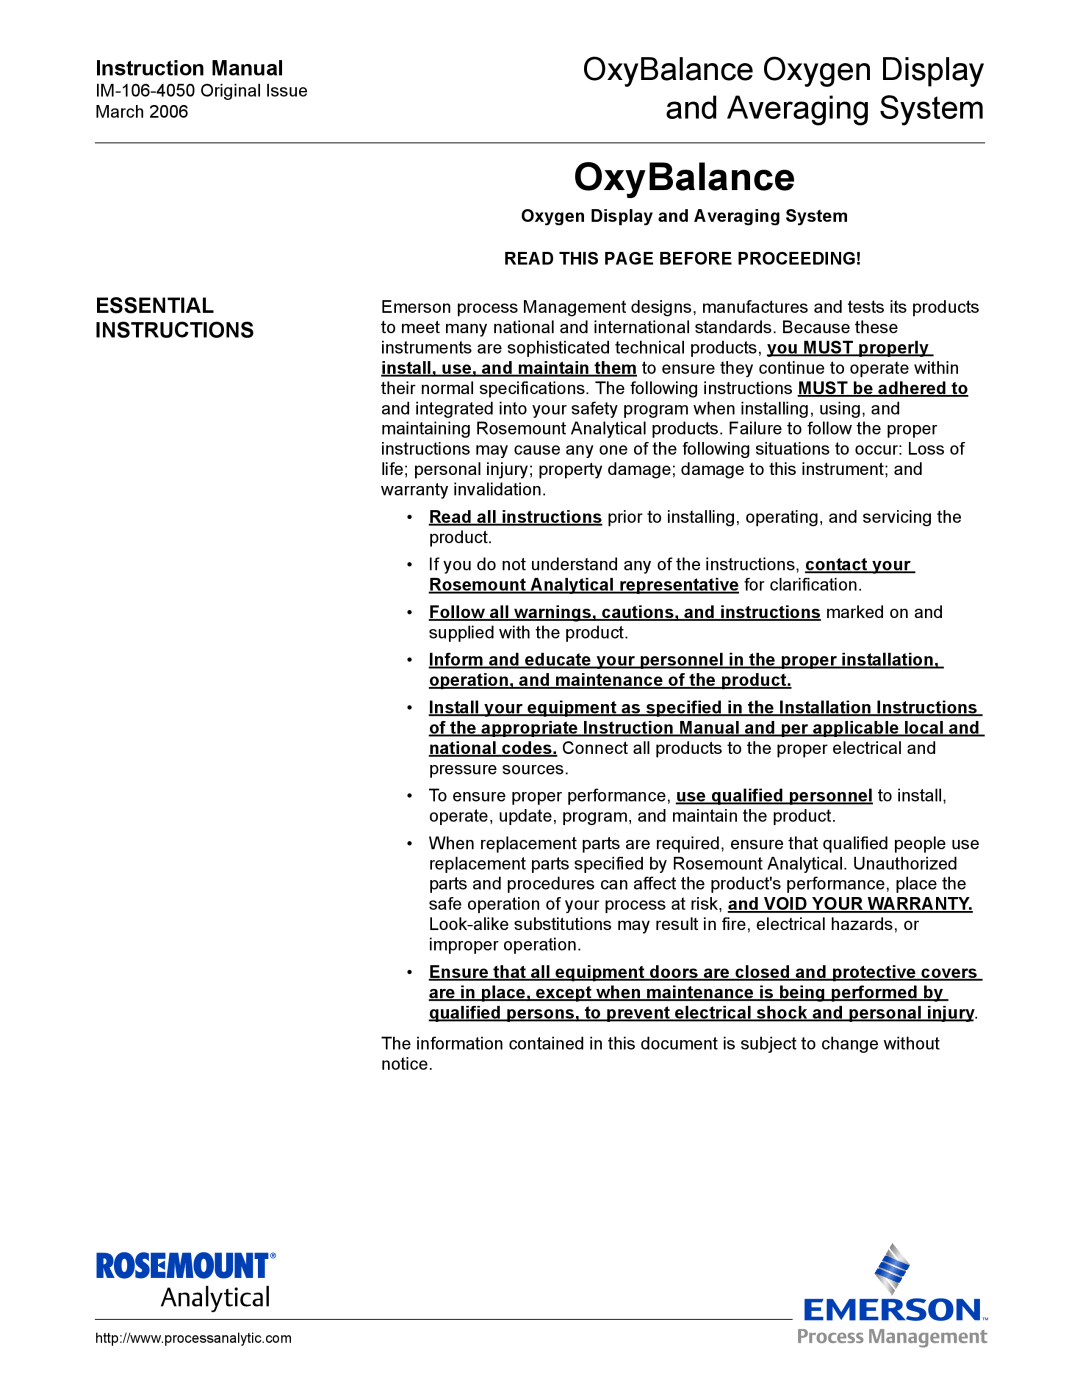 Emerson IM-106-4050 Essential Instructions, OxyBalance Oxygen Display and Averaging System, Instruction Manual 